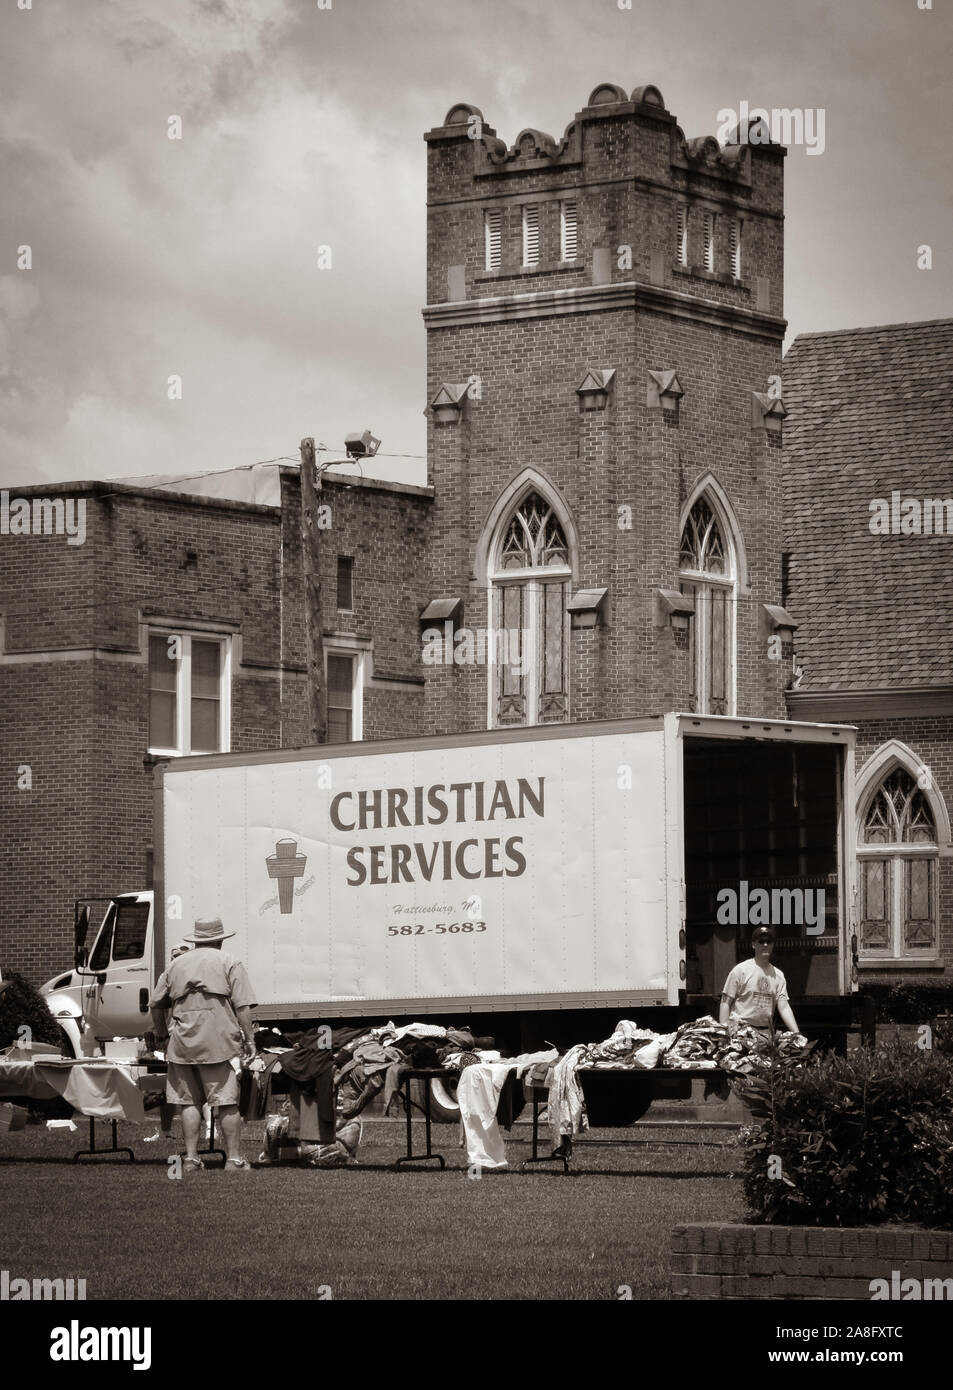 Gounds of the Central Christian Church and the True Light Missionary Baptist Church with people receiving and giving charitable Christian Services, MS Stock Photo